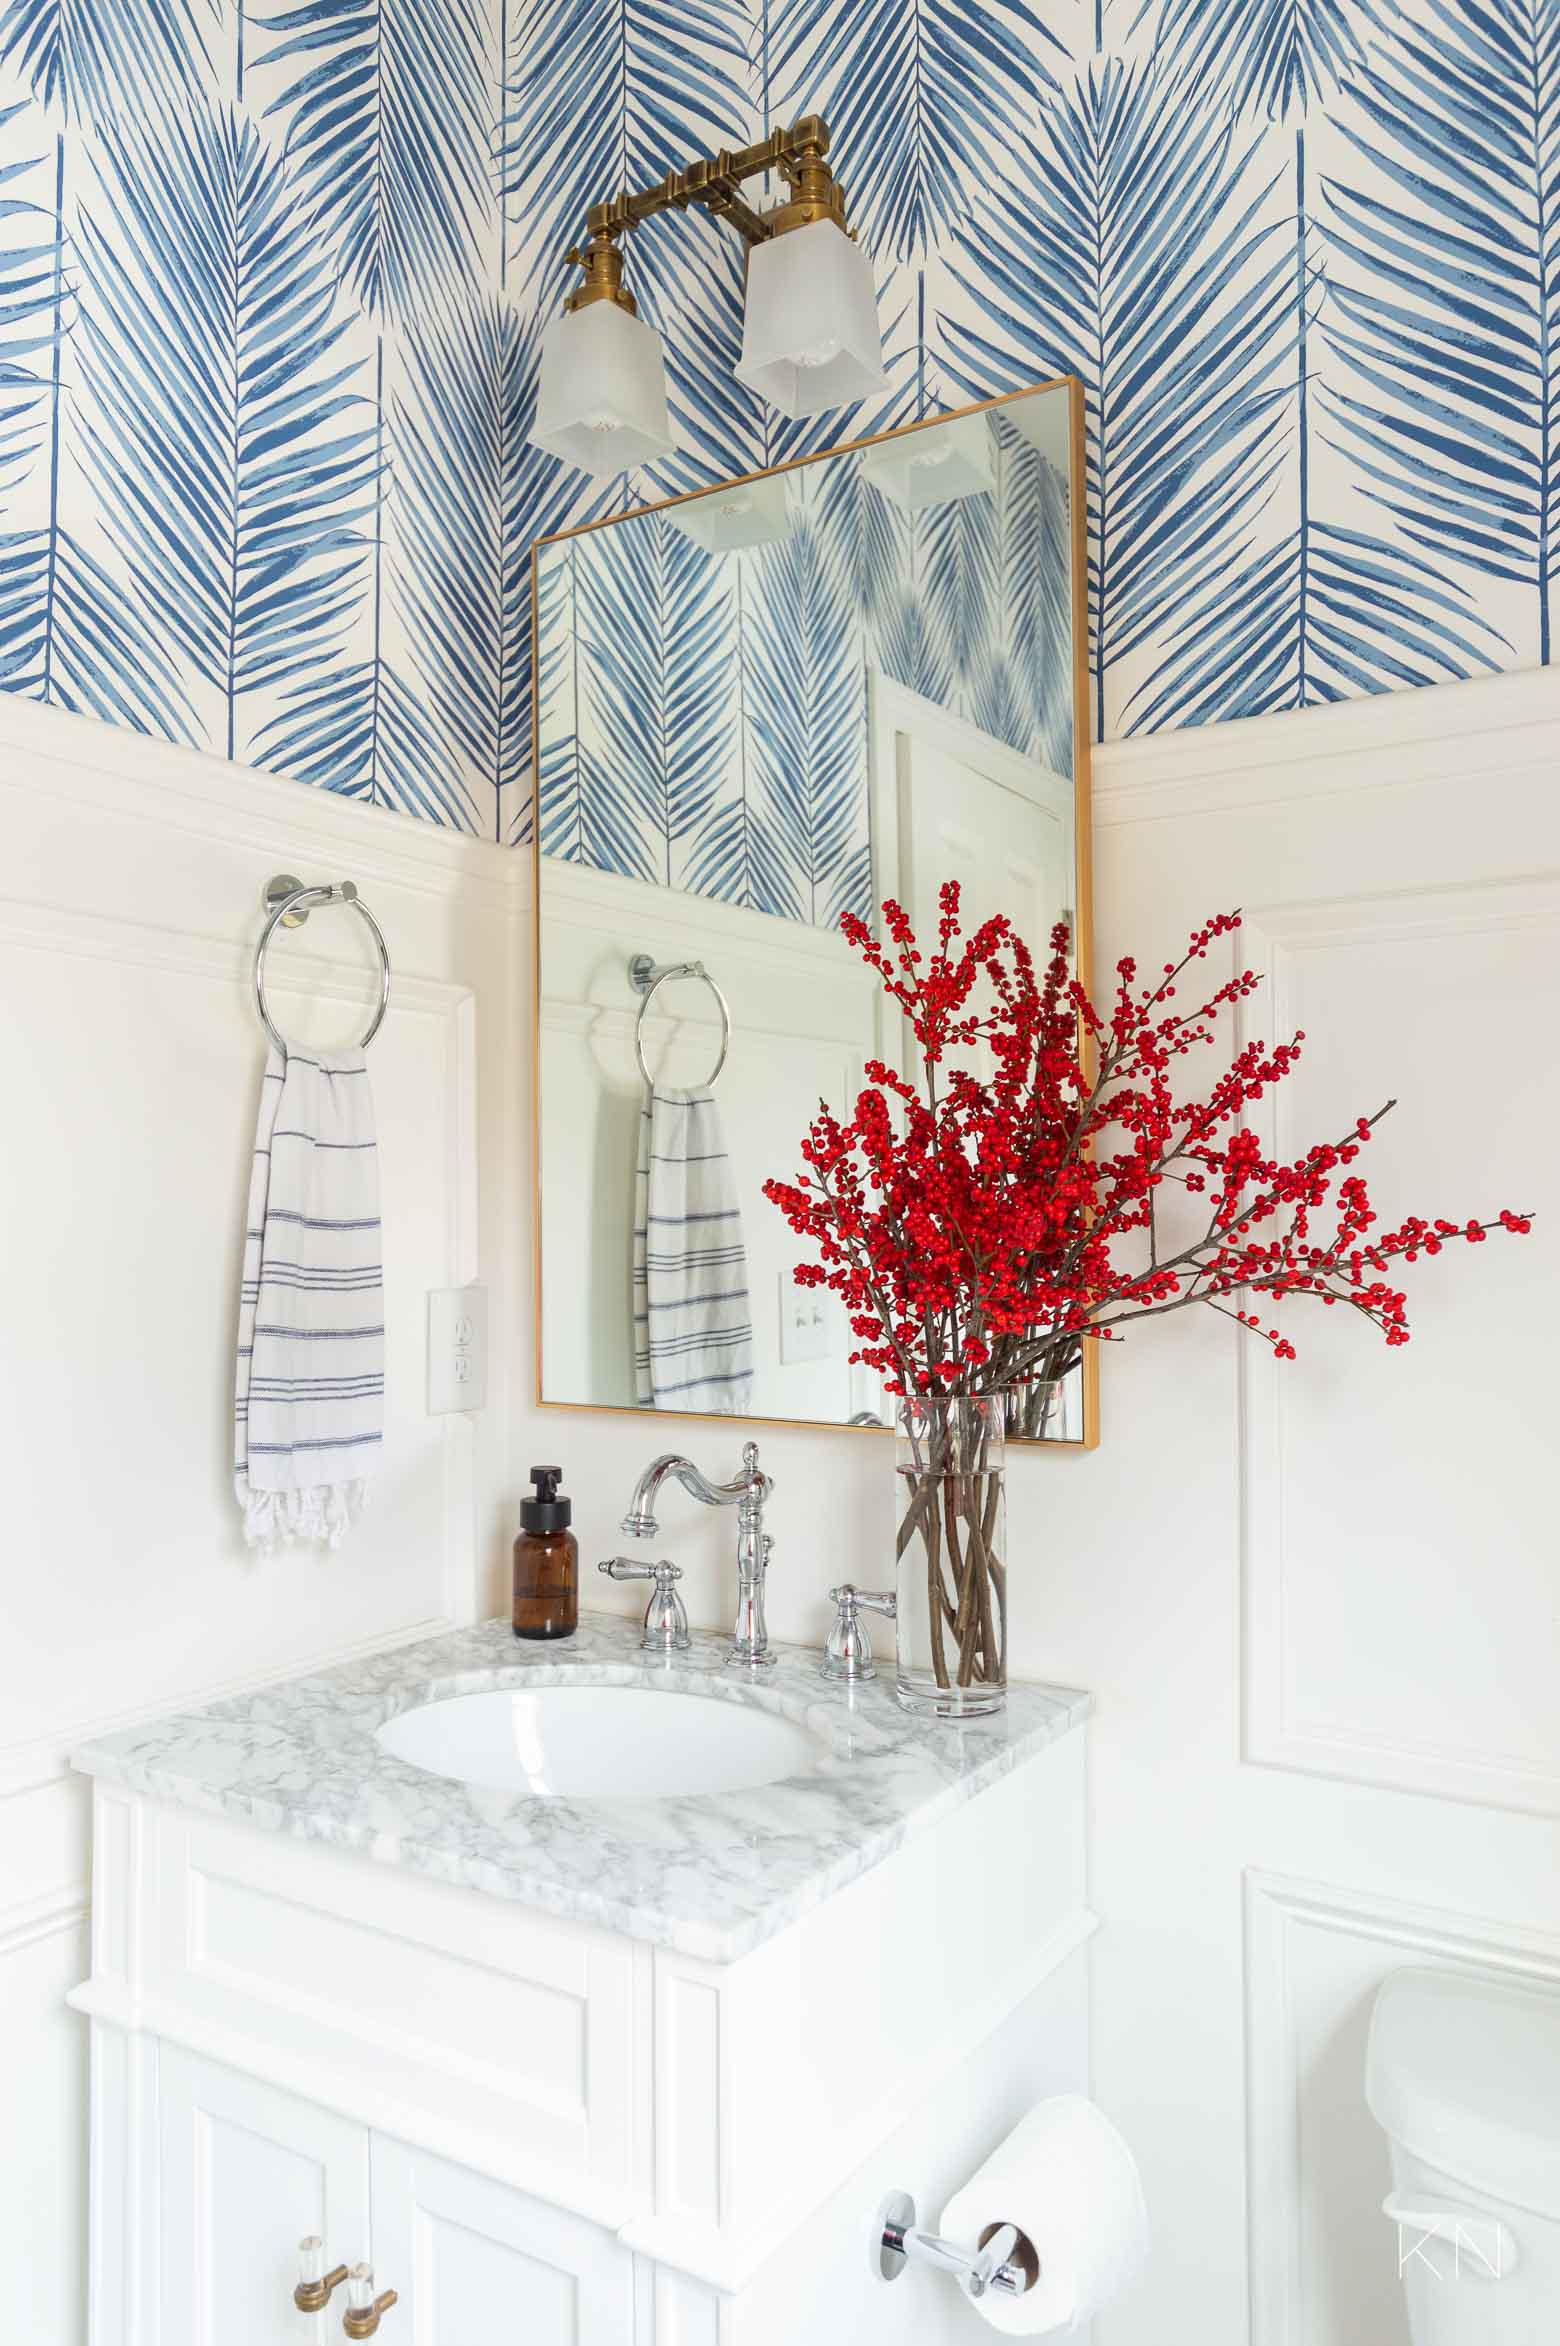 Easy Powder Room and Bathroom Christmas Decor -- Vase of Red Berries in Blue and White Powder Room